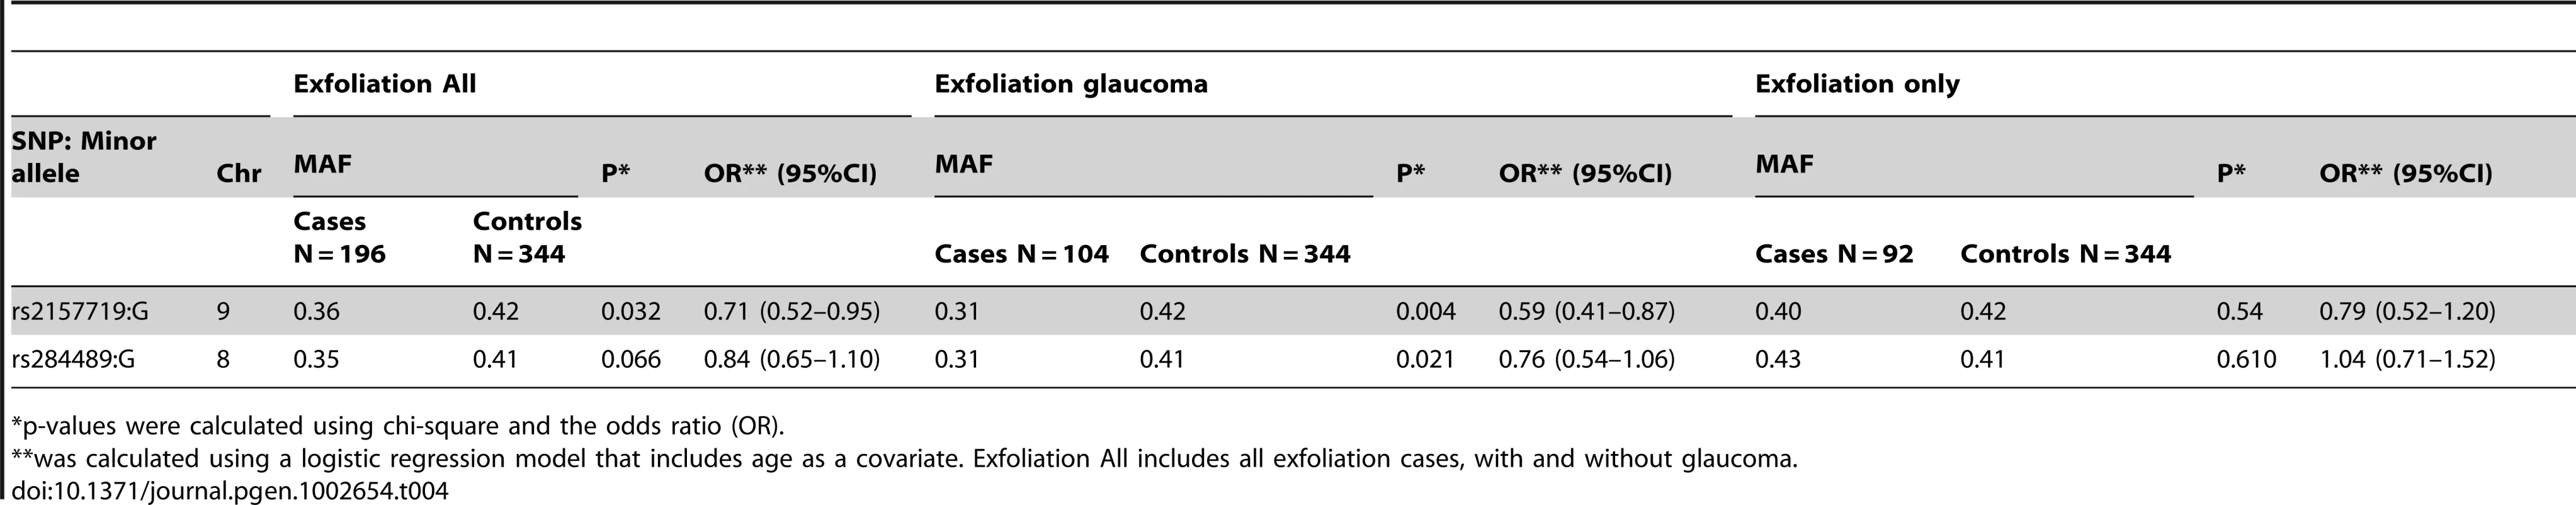 Association results for exfoliation glaucoma and 9p21 and 8q22 SNPs.